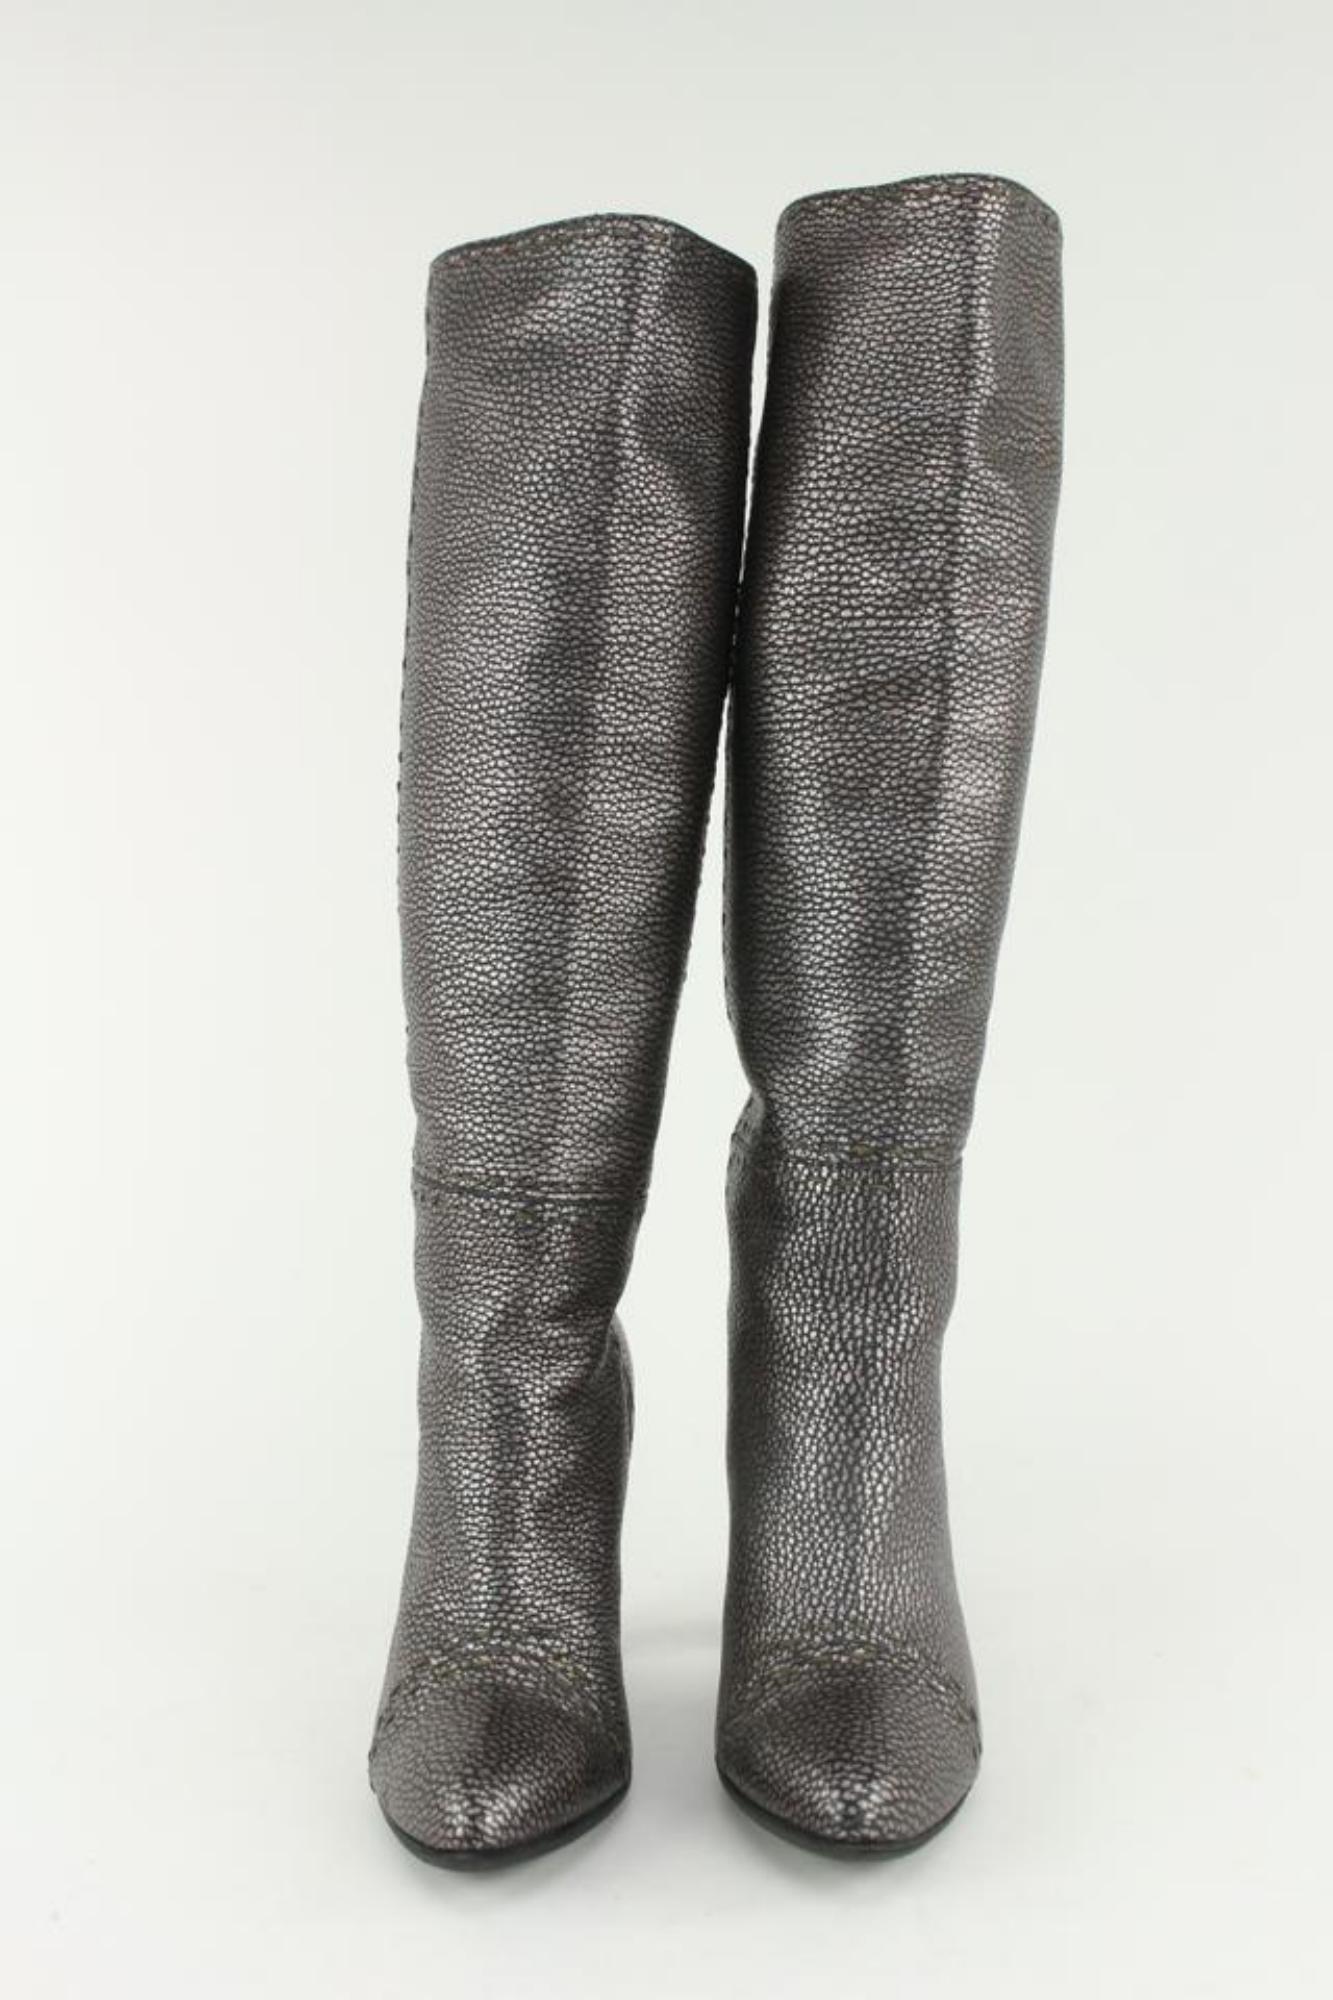 Fendi Women's 36.5 Knee High Grey Leather Selleria Boots 1F1206 For Sale 3